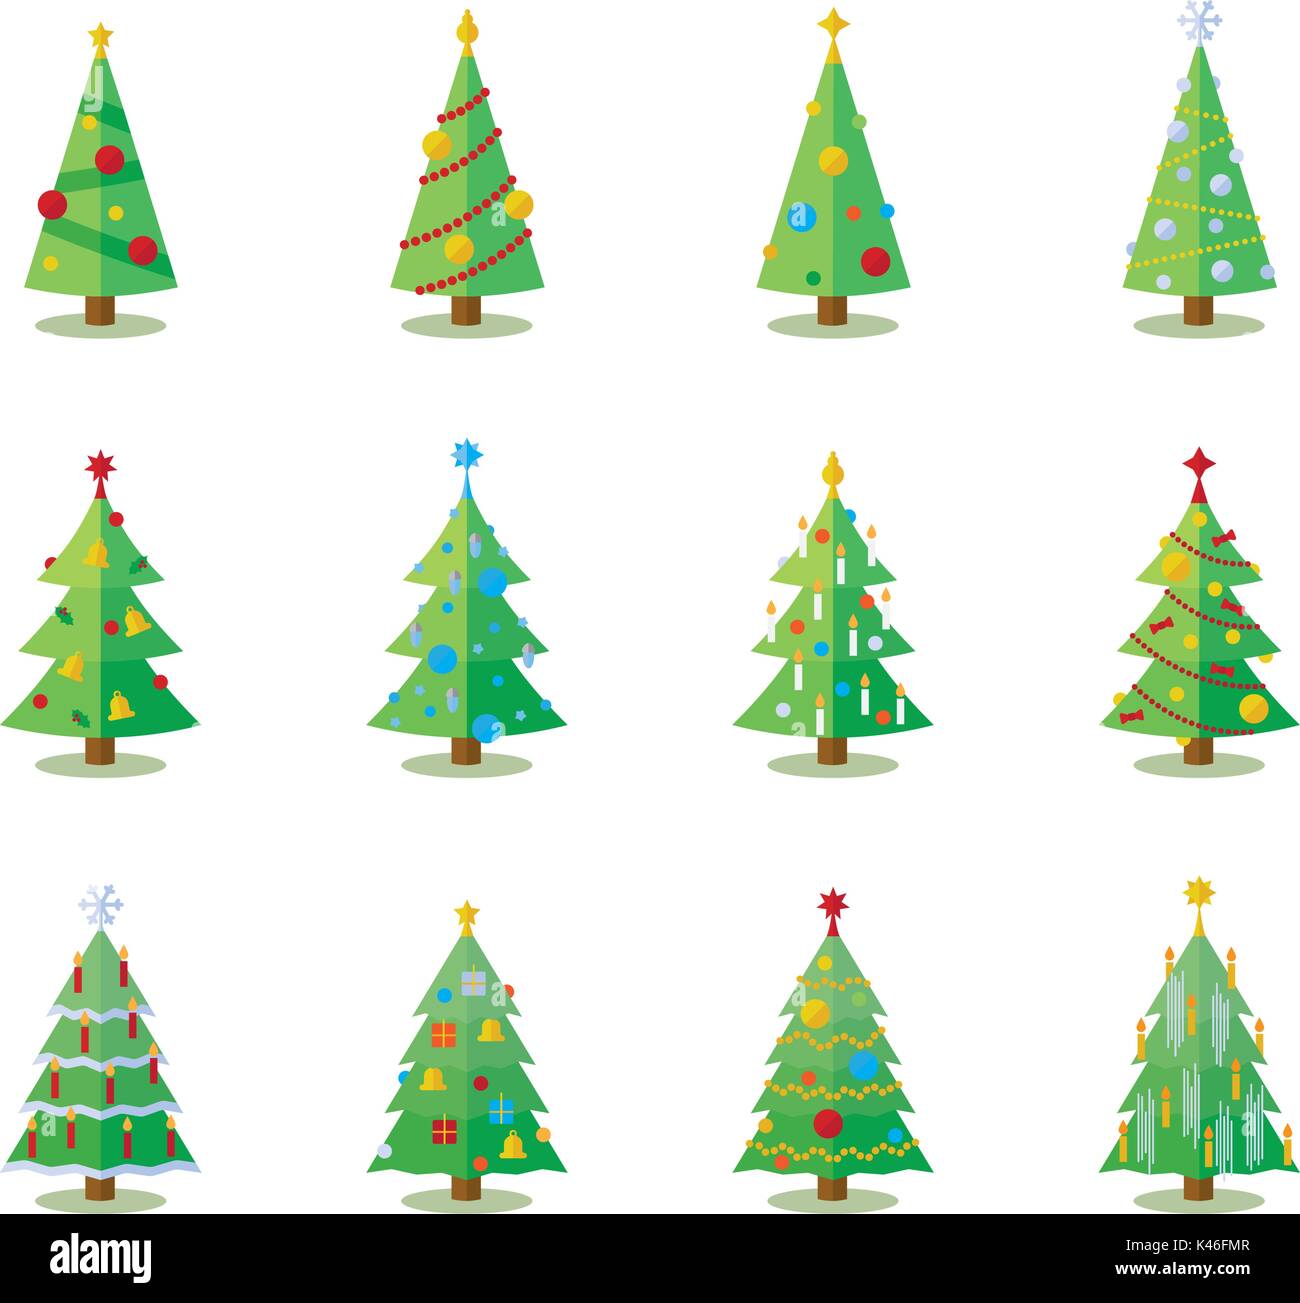 Tree variety Stock Vector Images - Alamy